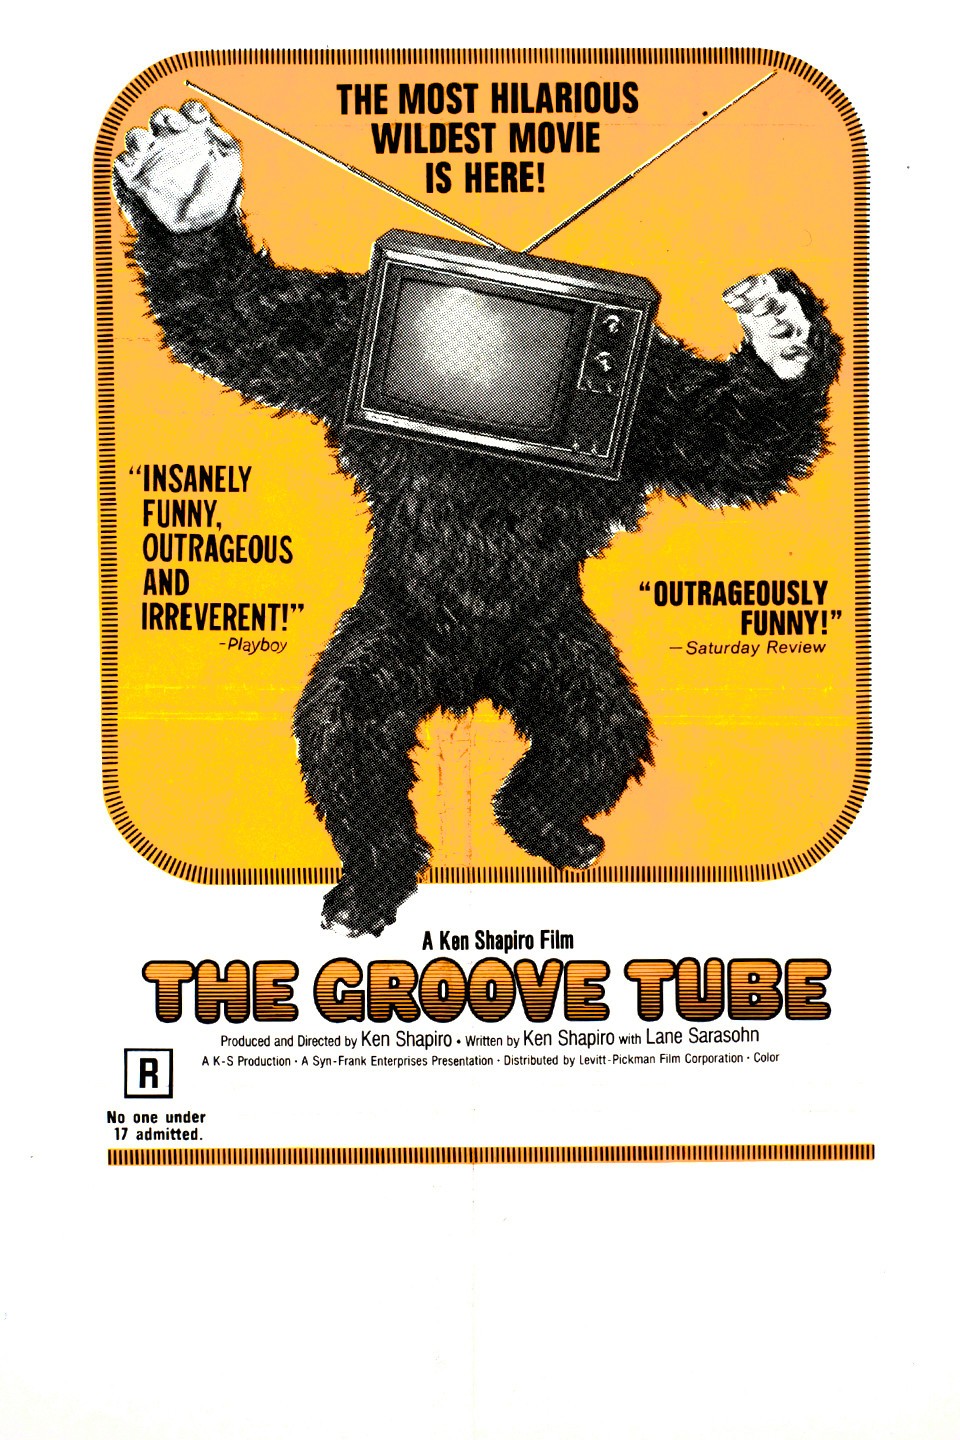 The Groove Tube - Rotten Tomatoes